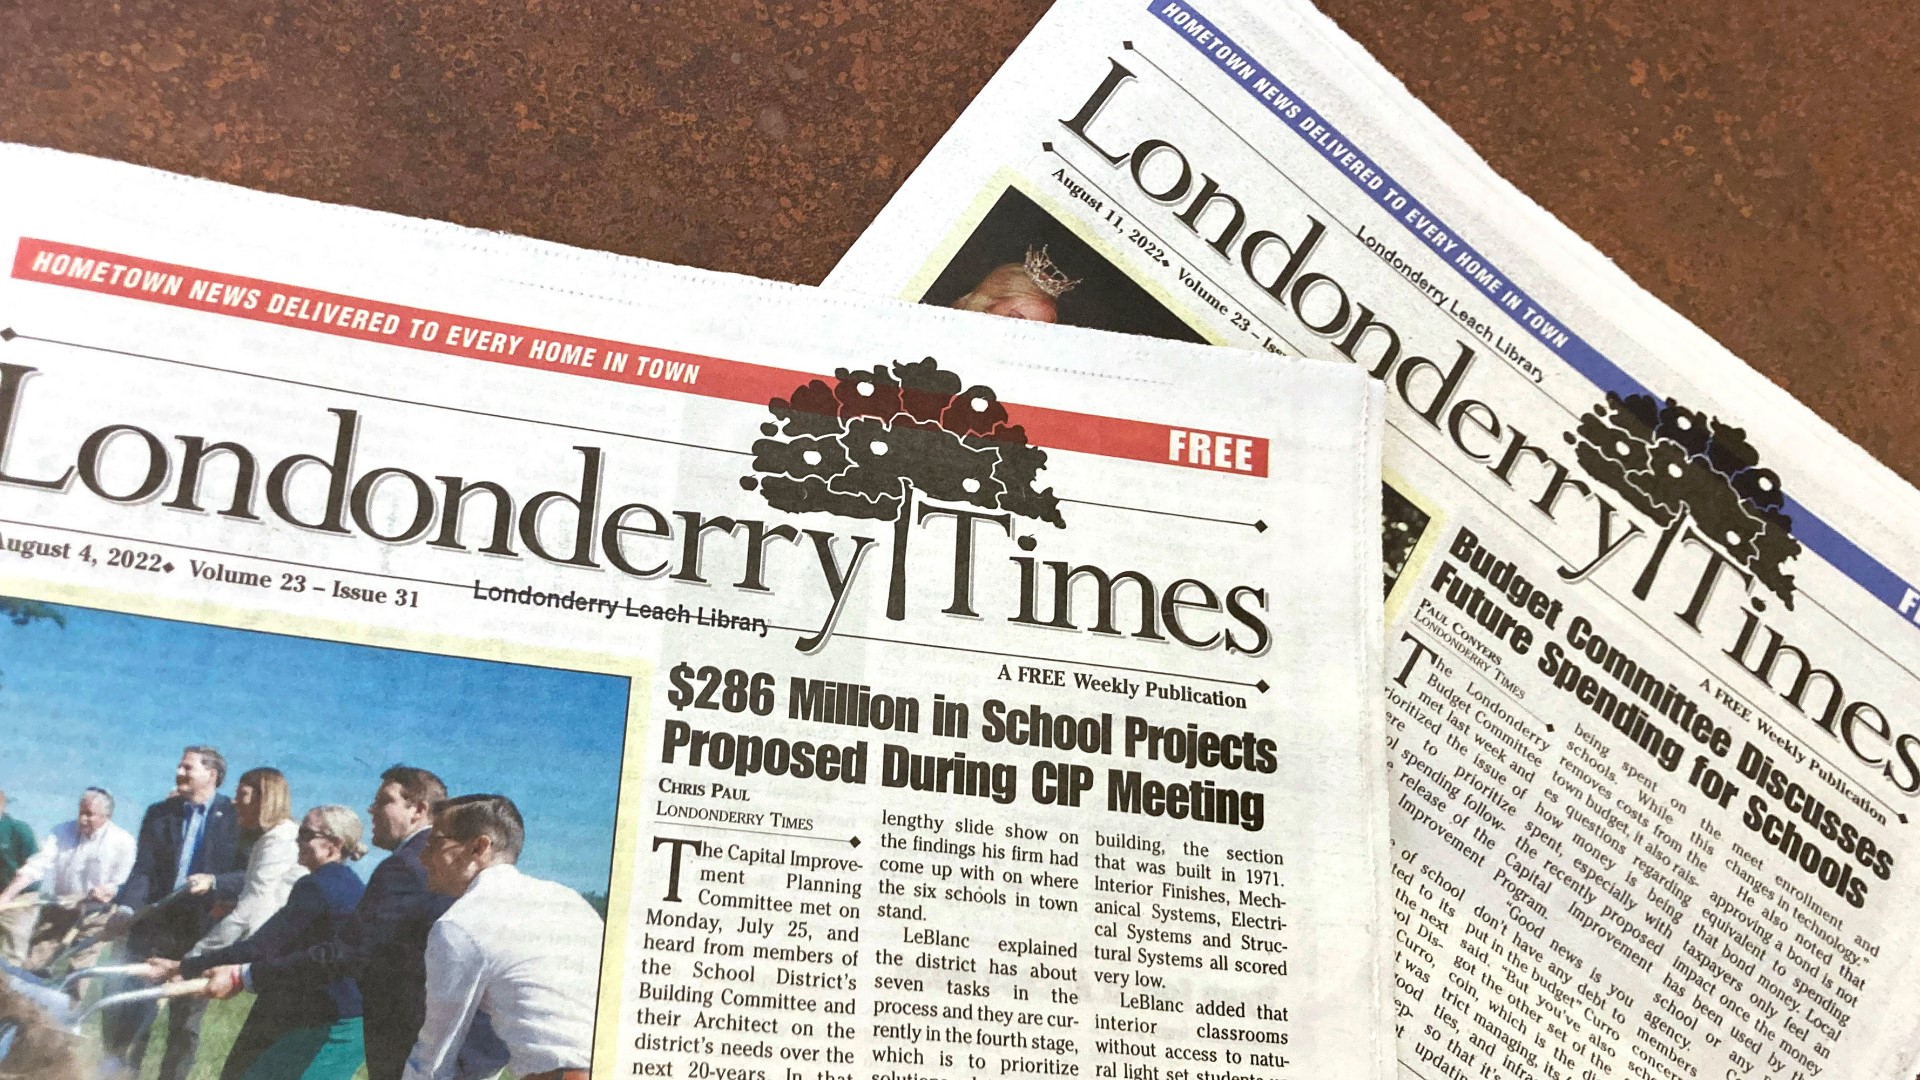 The six misdemeanor charges allege the publisher of The Londonderry Times in New Hampshire failed to identify the ads with "appropriate language."